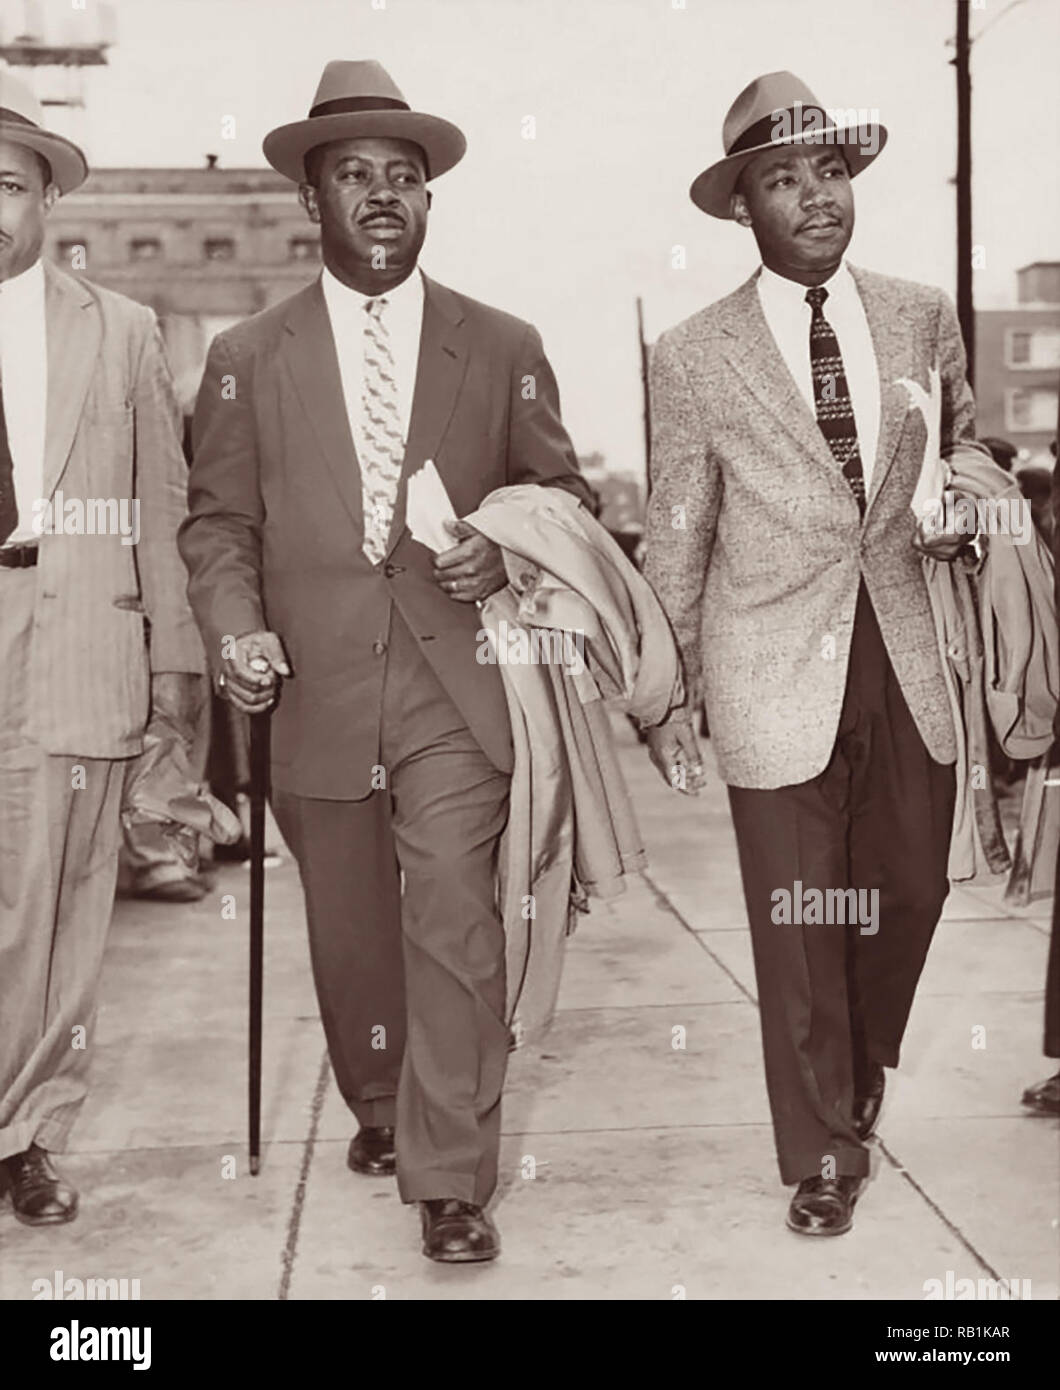 Ralph David Abernathy, Sr. and Martin Luther King, Jr., leaving the County Courthouse in Montgomery, Alabama, 1956. (USA) Stock Photo